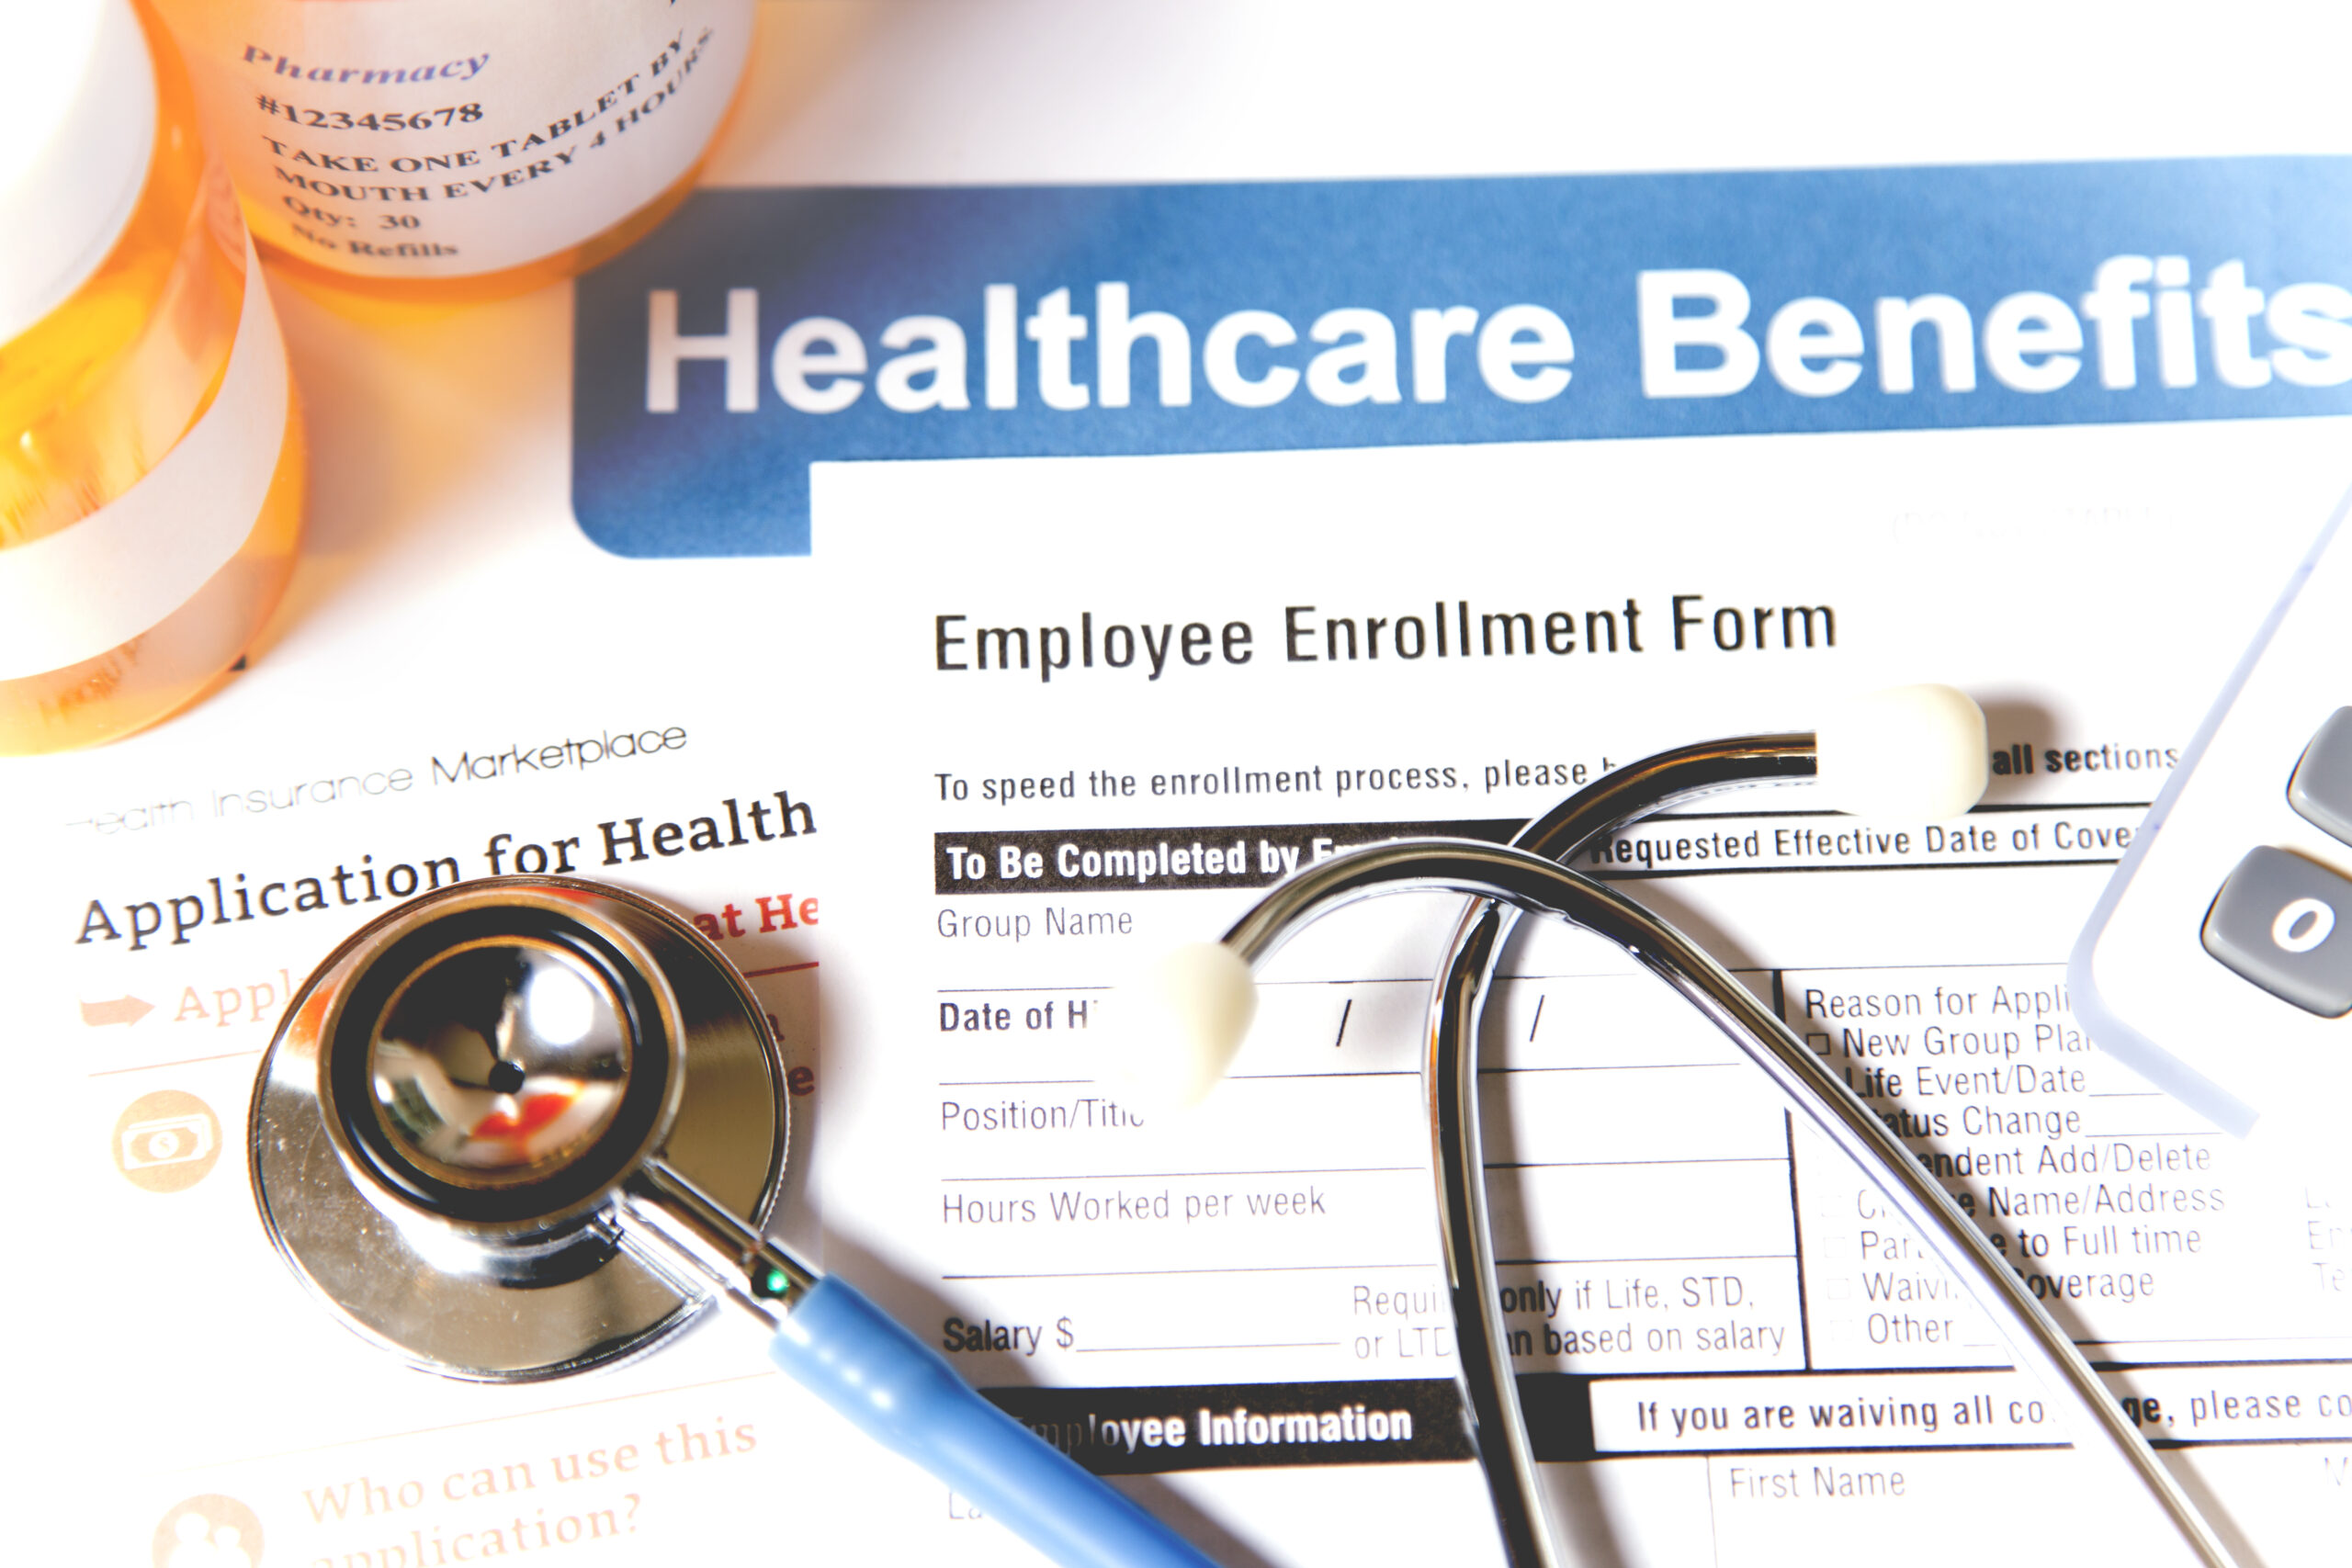 Healthcare benefit forms including: enrollment forms and applications, stethoscope, calculator. Affordable healthcare remains an important topic around the world!